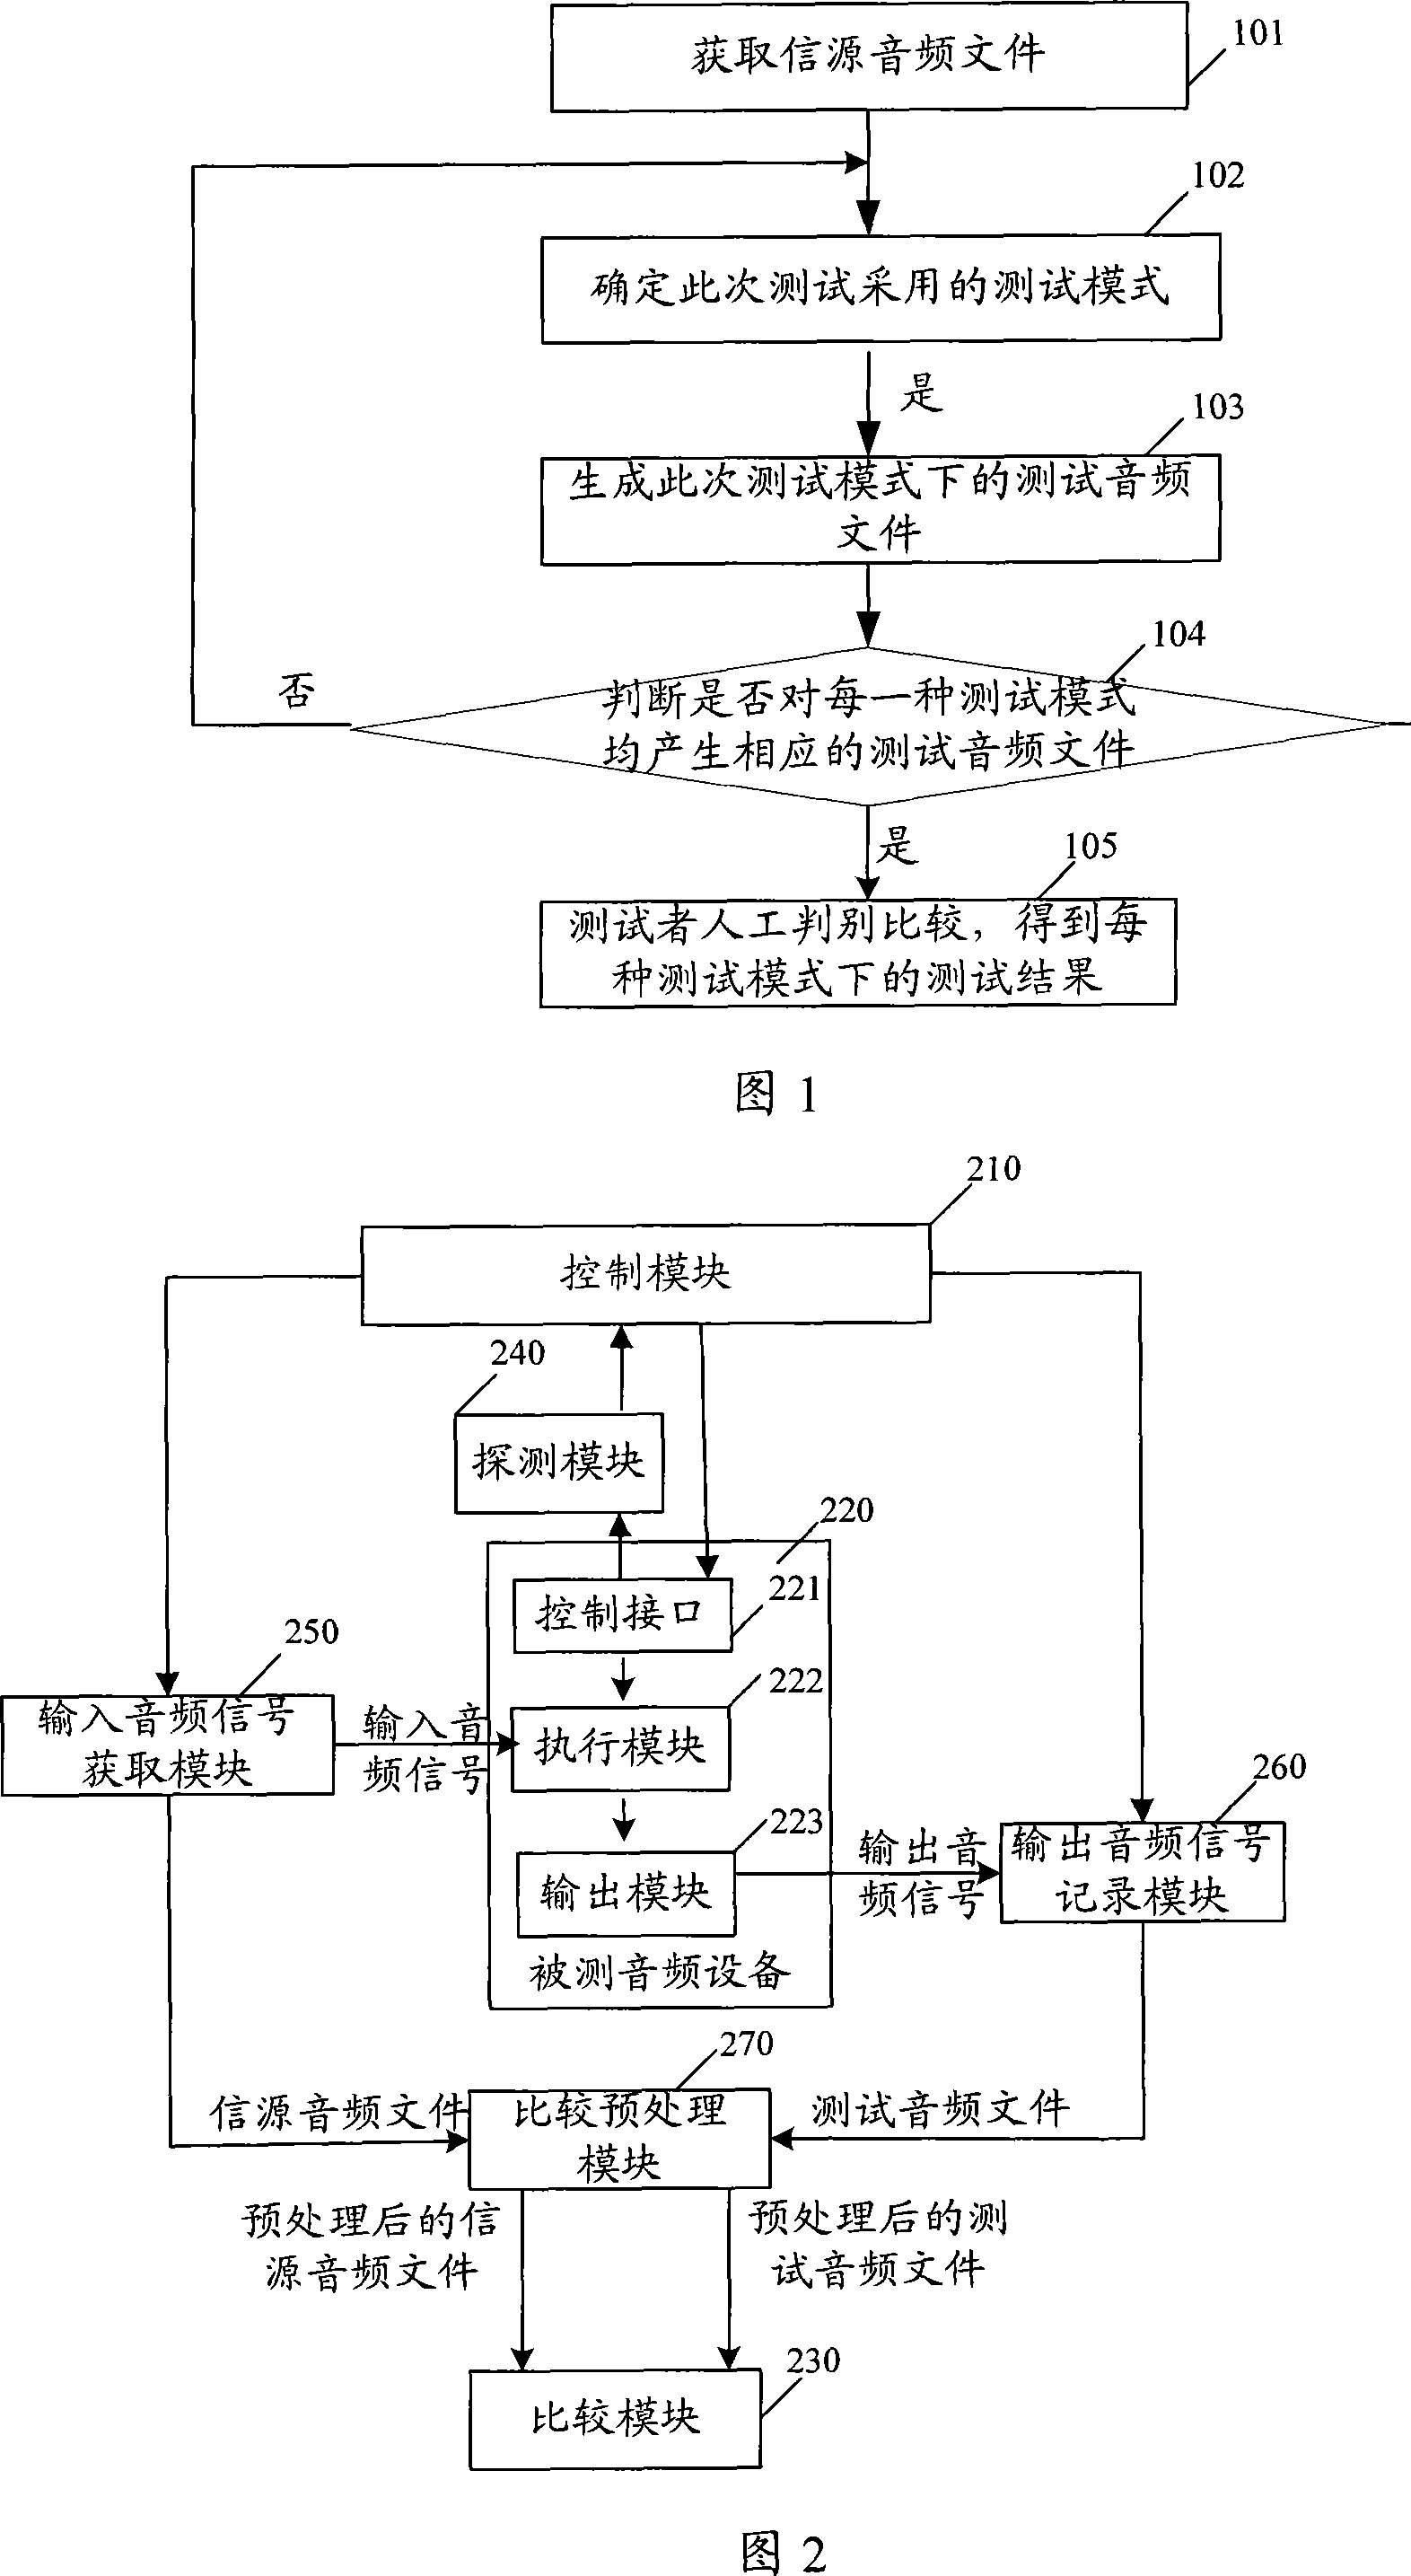 Method system for implementing investigating audio-frequency equipment and audio-frequency equipment